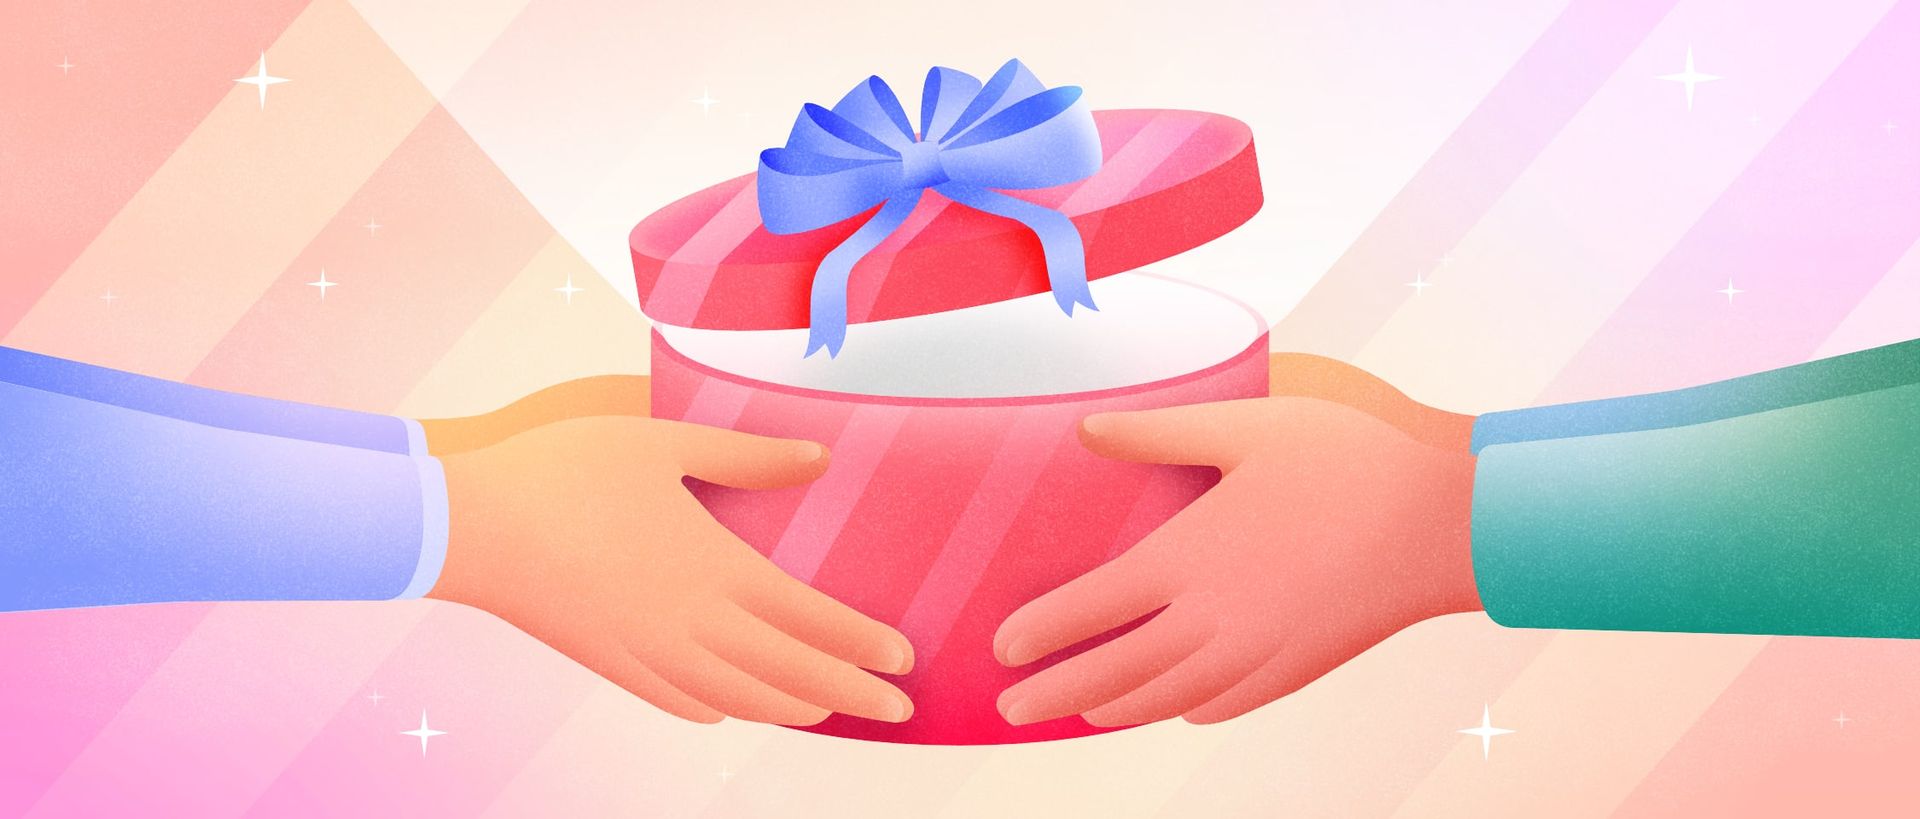 Hands of 2 people holding a Christmas gift together